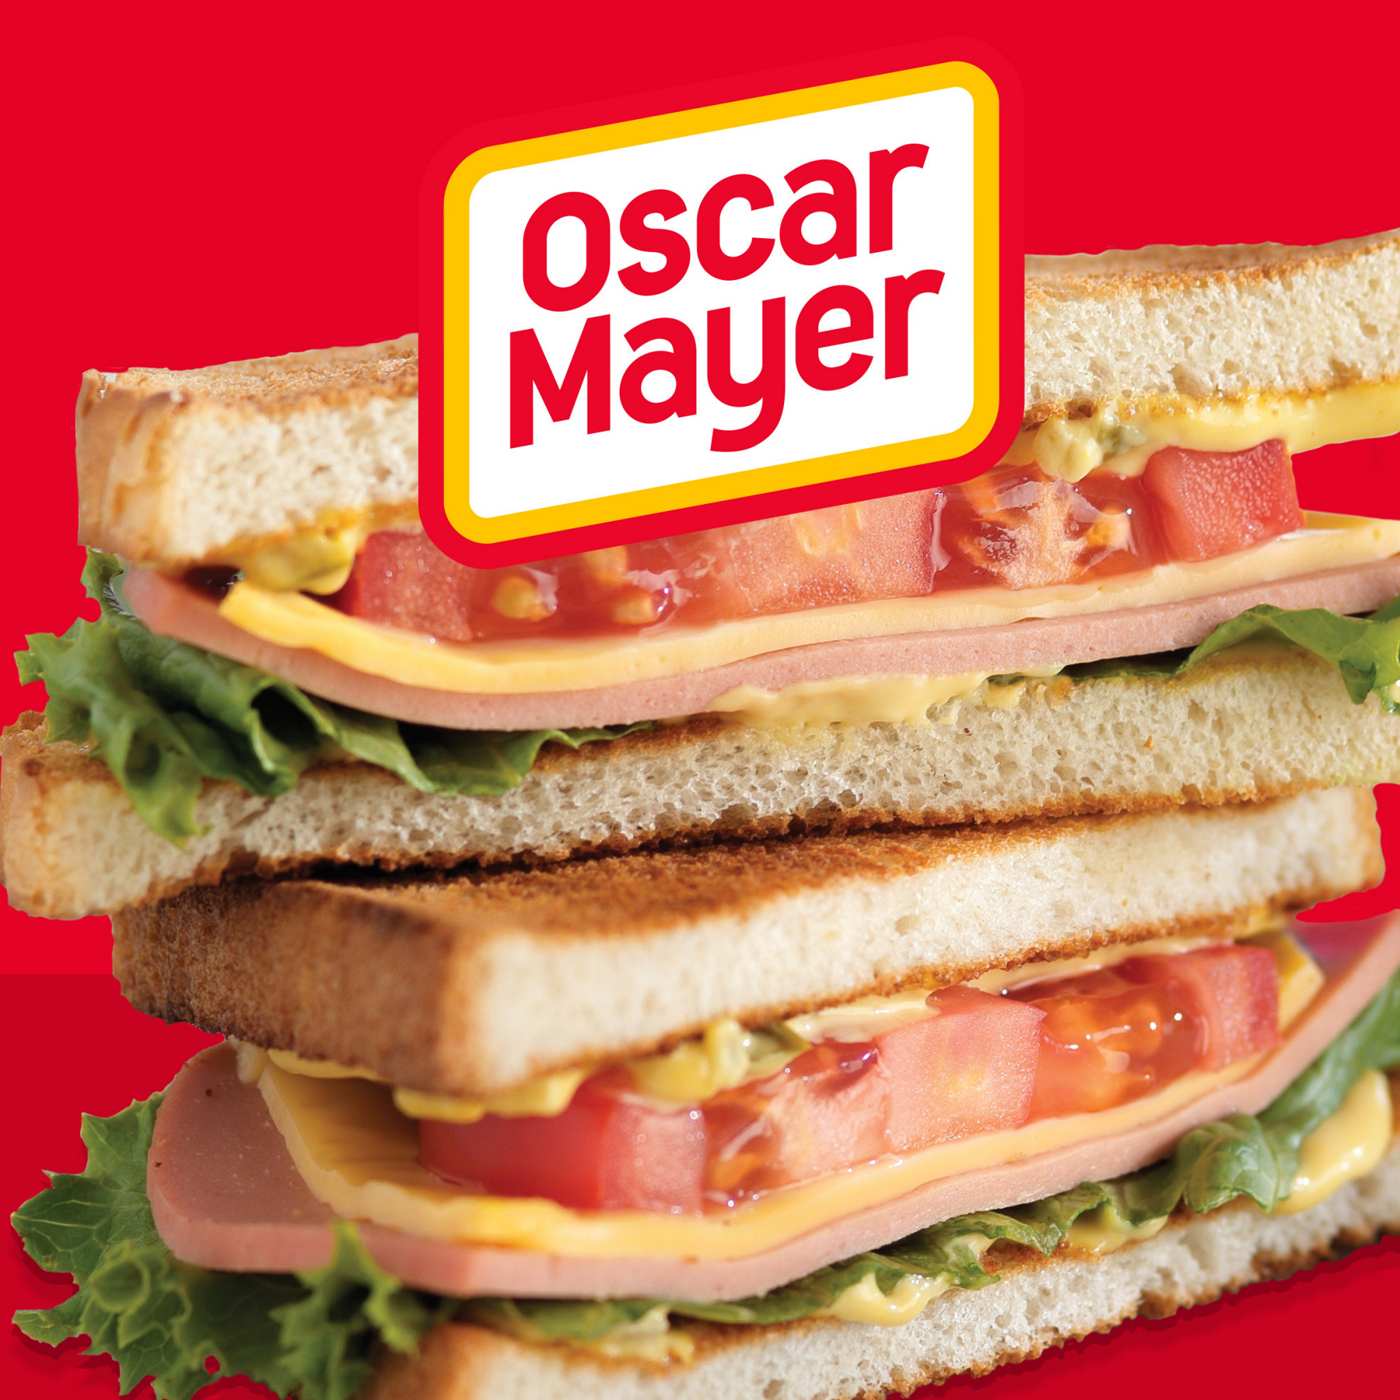 Oscar Mayer Bologna Deli Lunch Meat; image 3 of 6